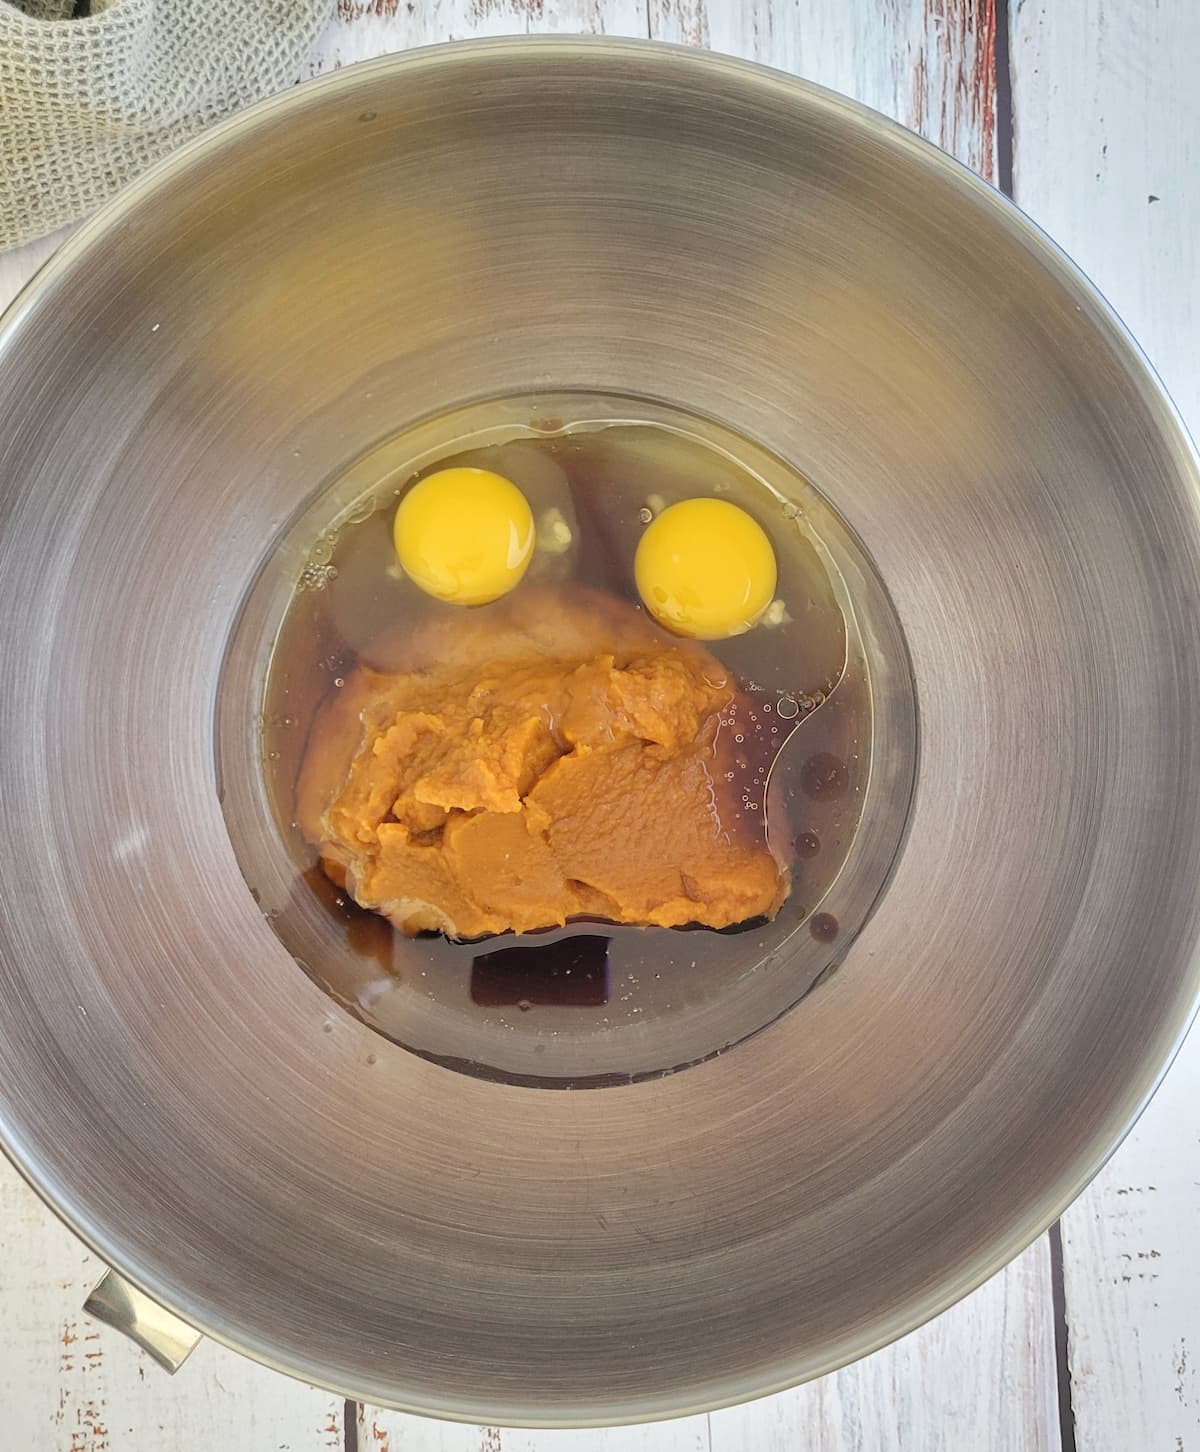 2 eggs, pumpkin puree and other wet ingredients unmixed in a bowl